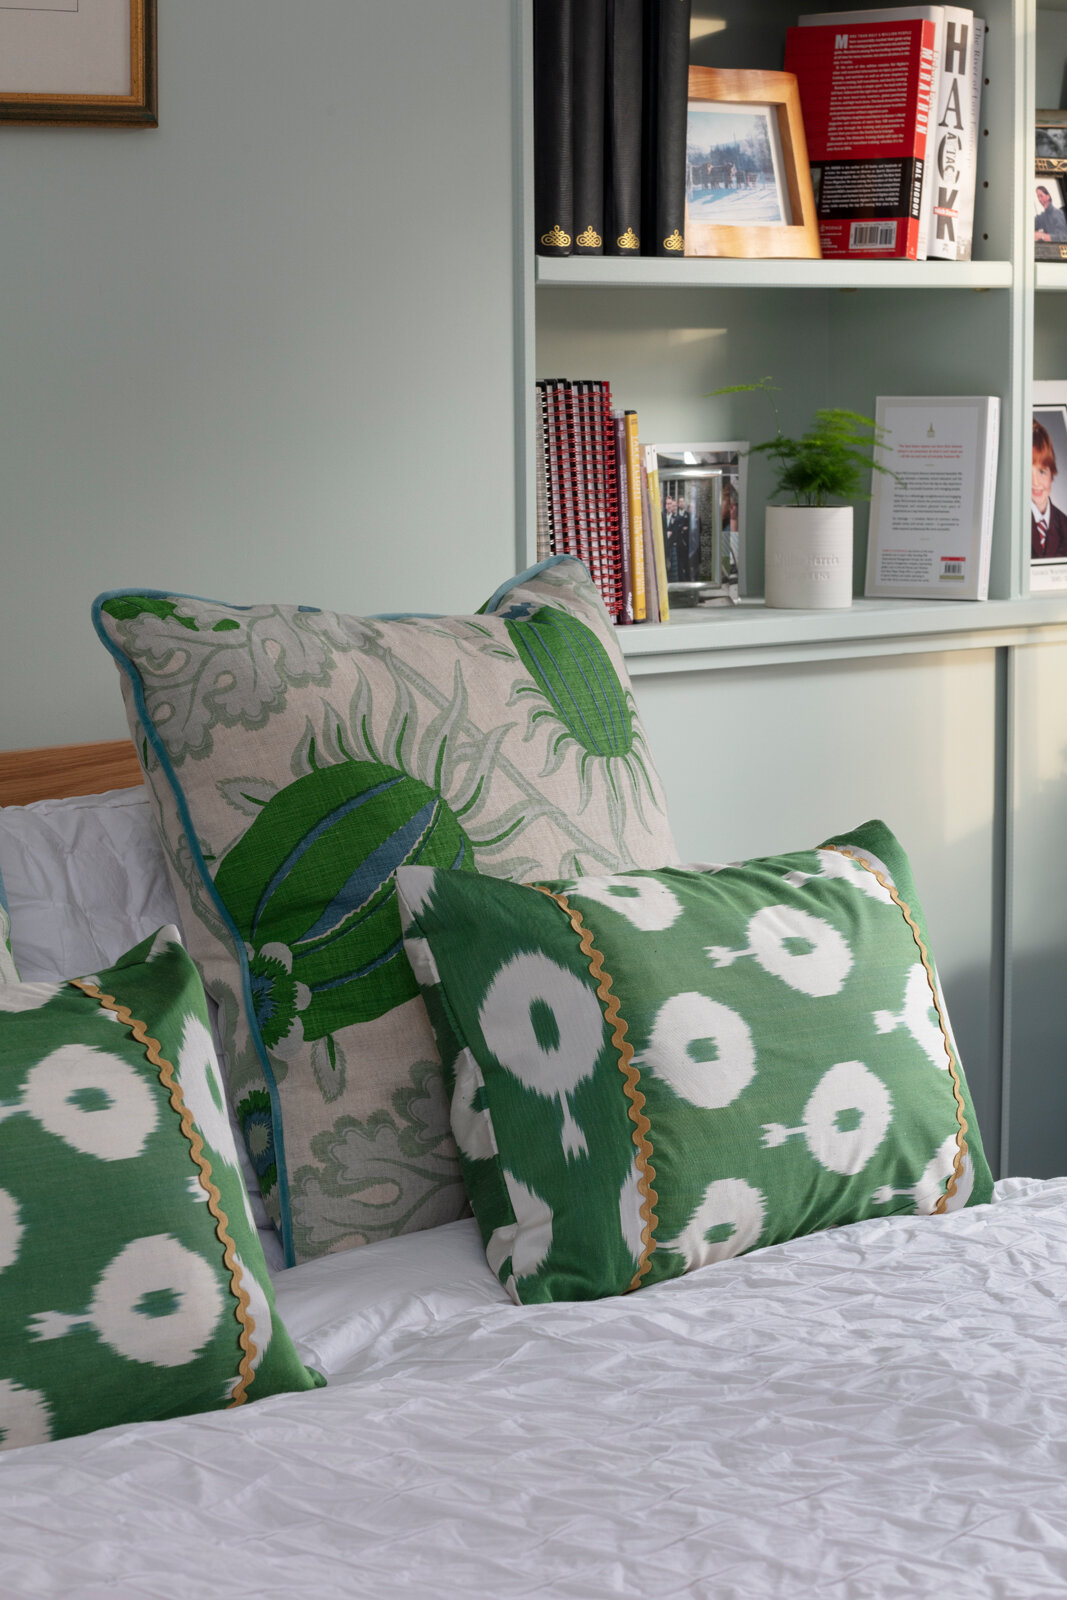 Cushions behind by The London Curtain Girls using Christopher Farr Carnival fabric/Green Ikat cushions from Polkra